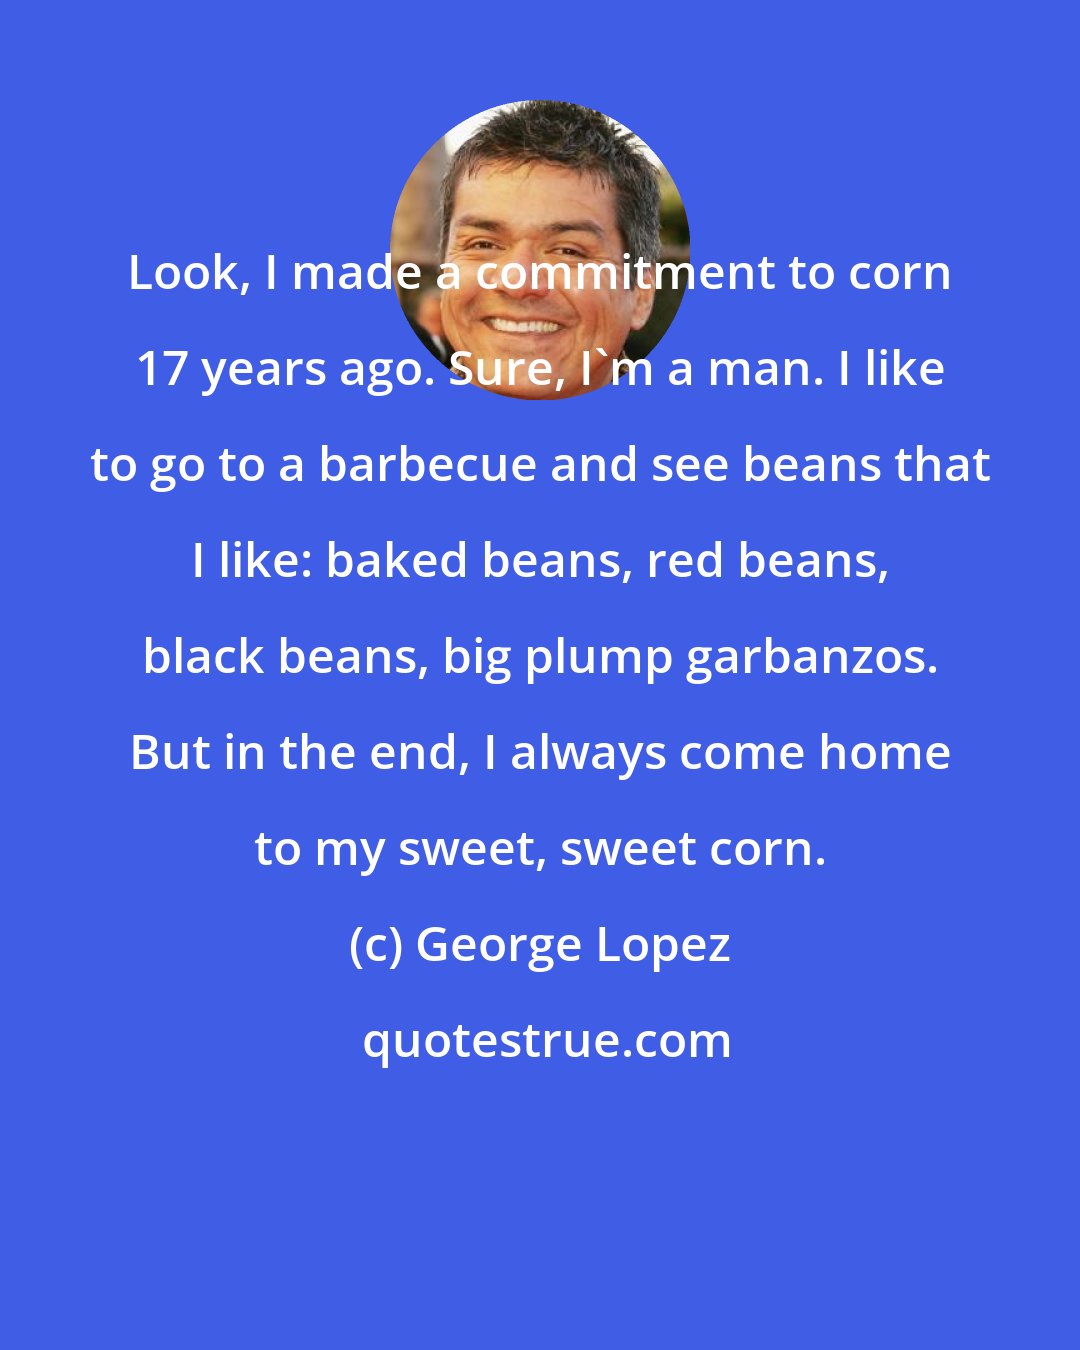 George Lopez: Look, I made a commitment to corn 17 years ago. Sure, I'm a man. I like to go to a barbecue and see beans that I like: baked beans, red beans, black beans, big plump garbanzos. But in the end, I always come home to my sweet, sweet corn.